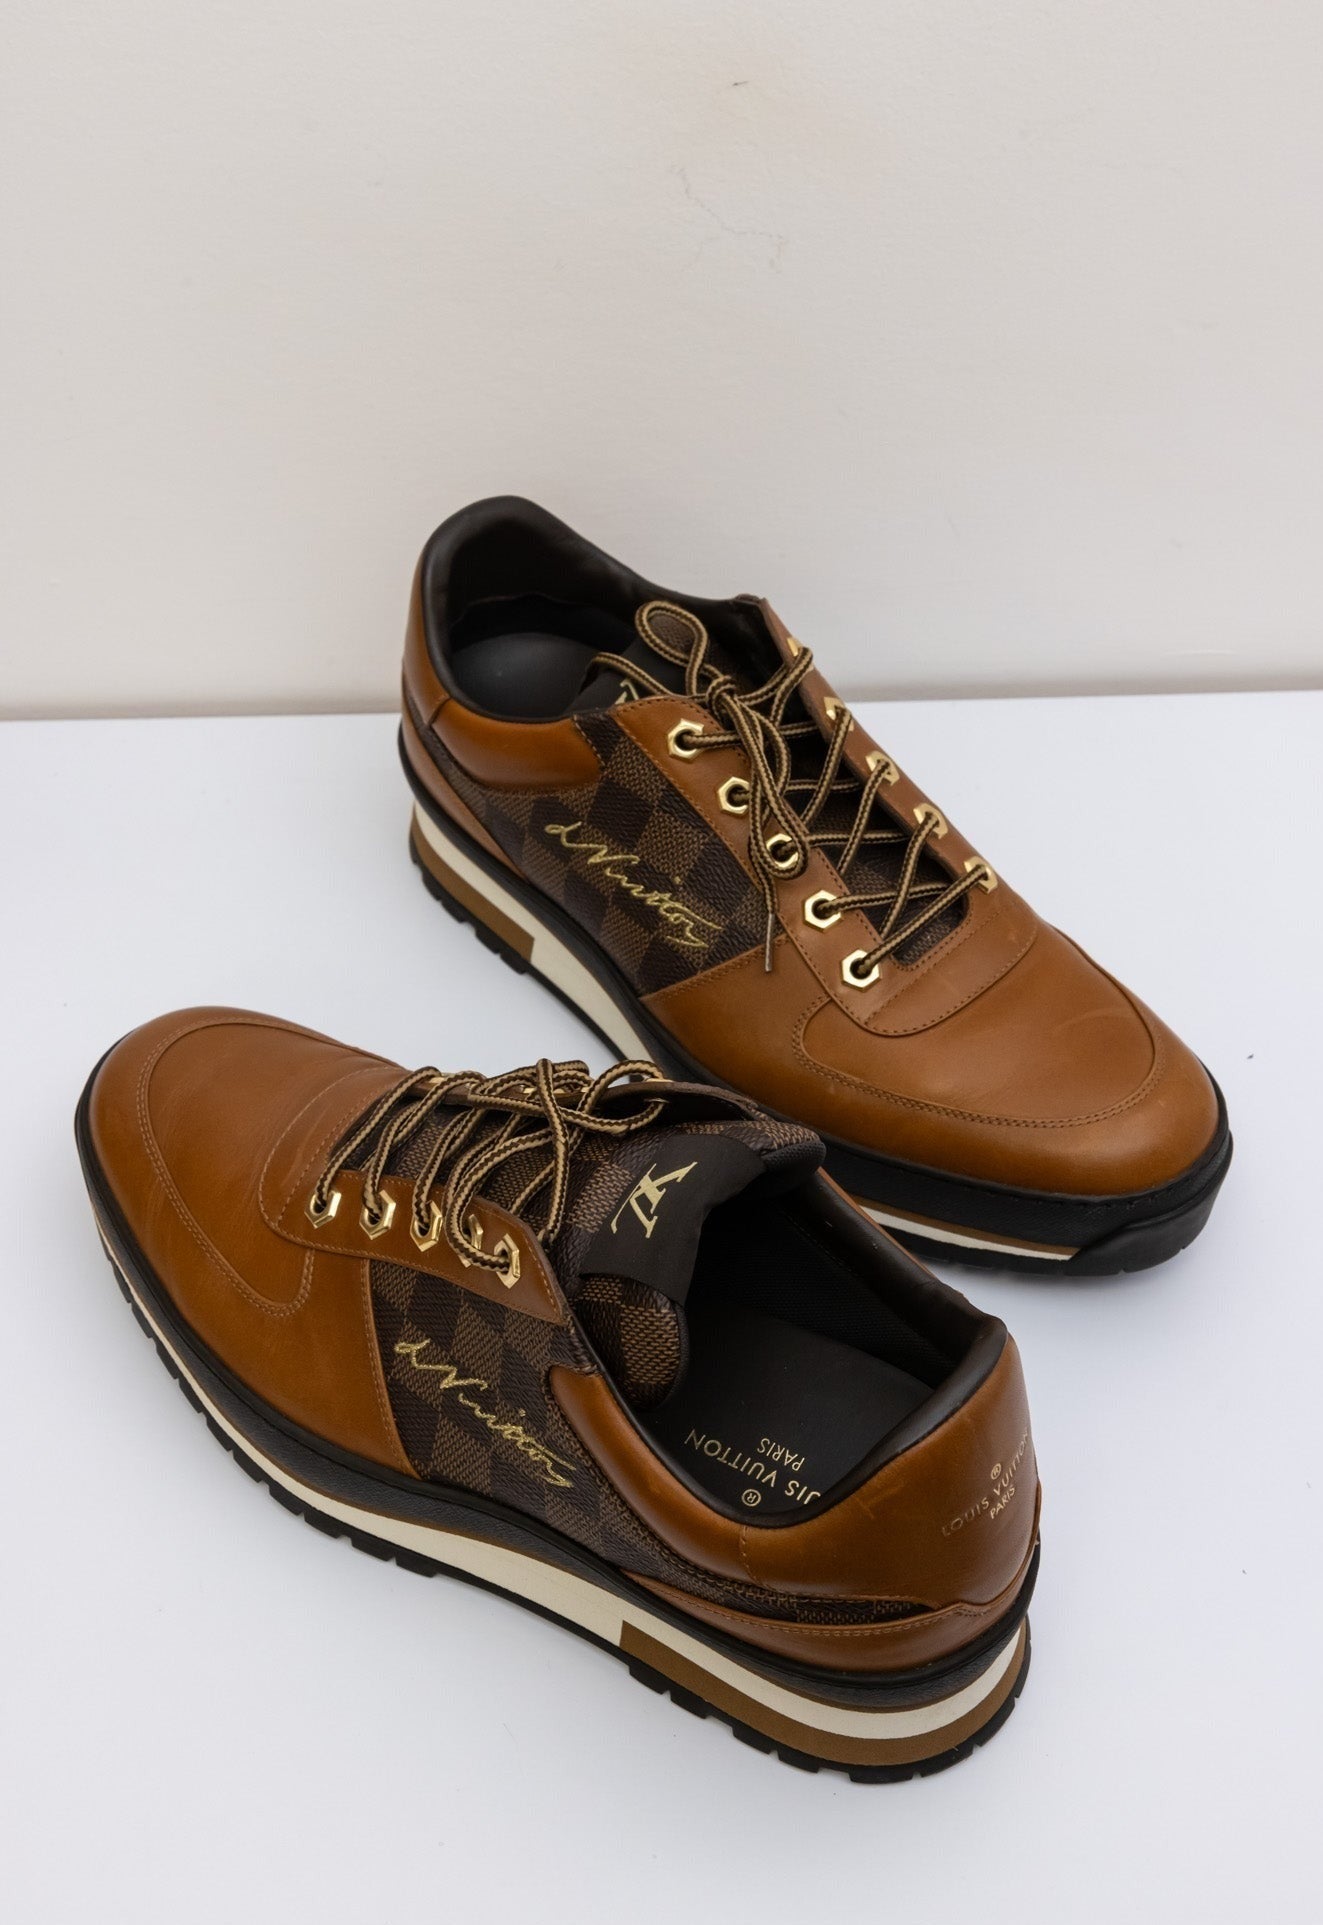 LOUIS VUITTON Tan Leather lace up sneakers for men